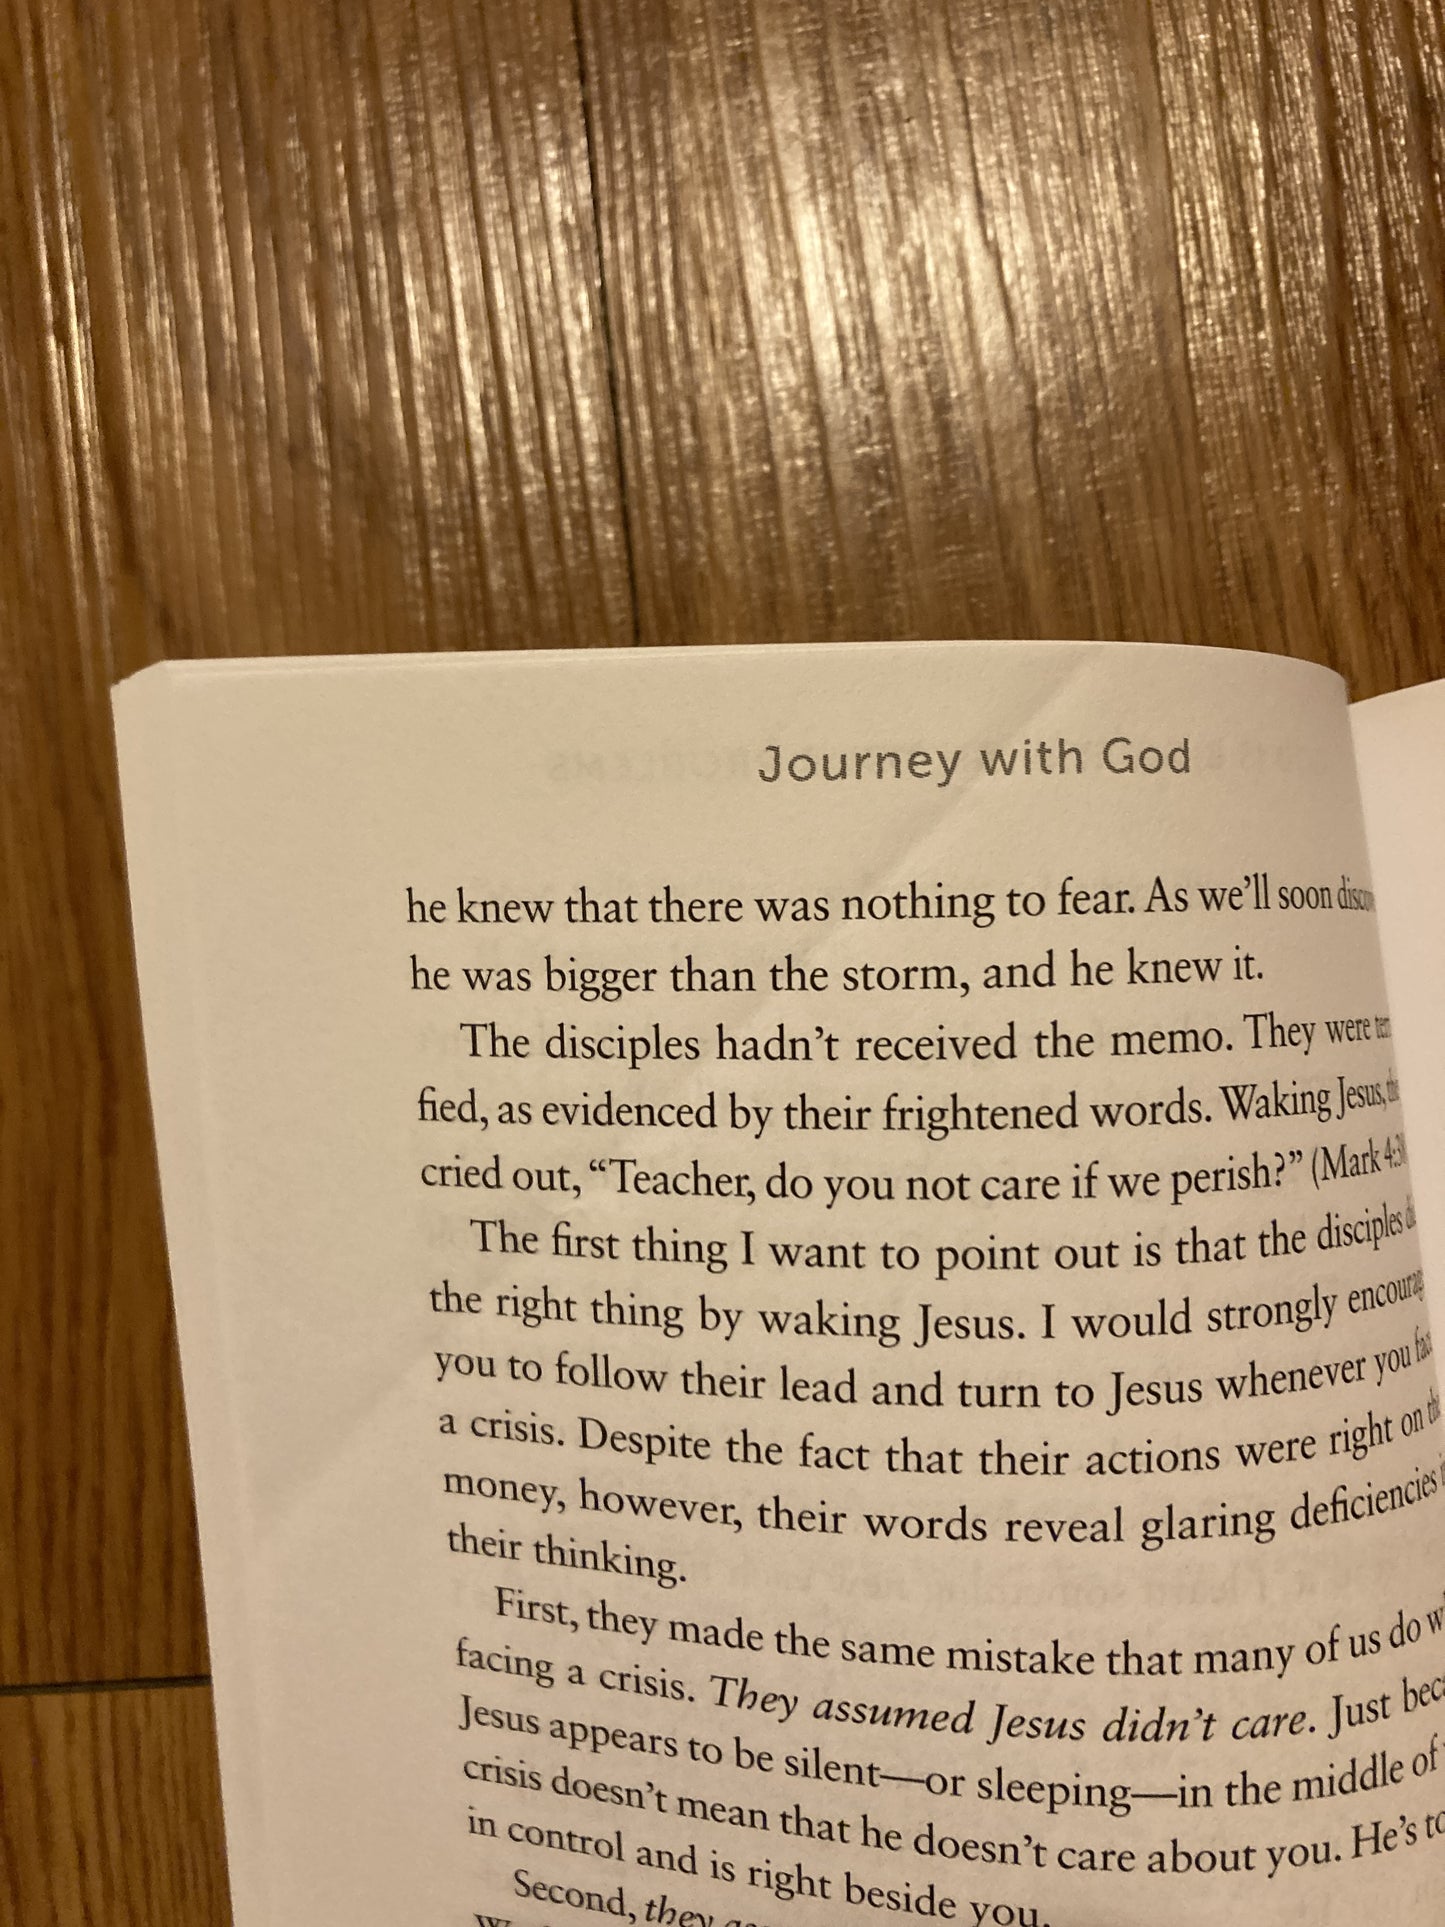 Journey with God: Finding Peace and Happiness